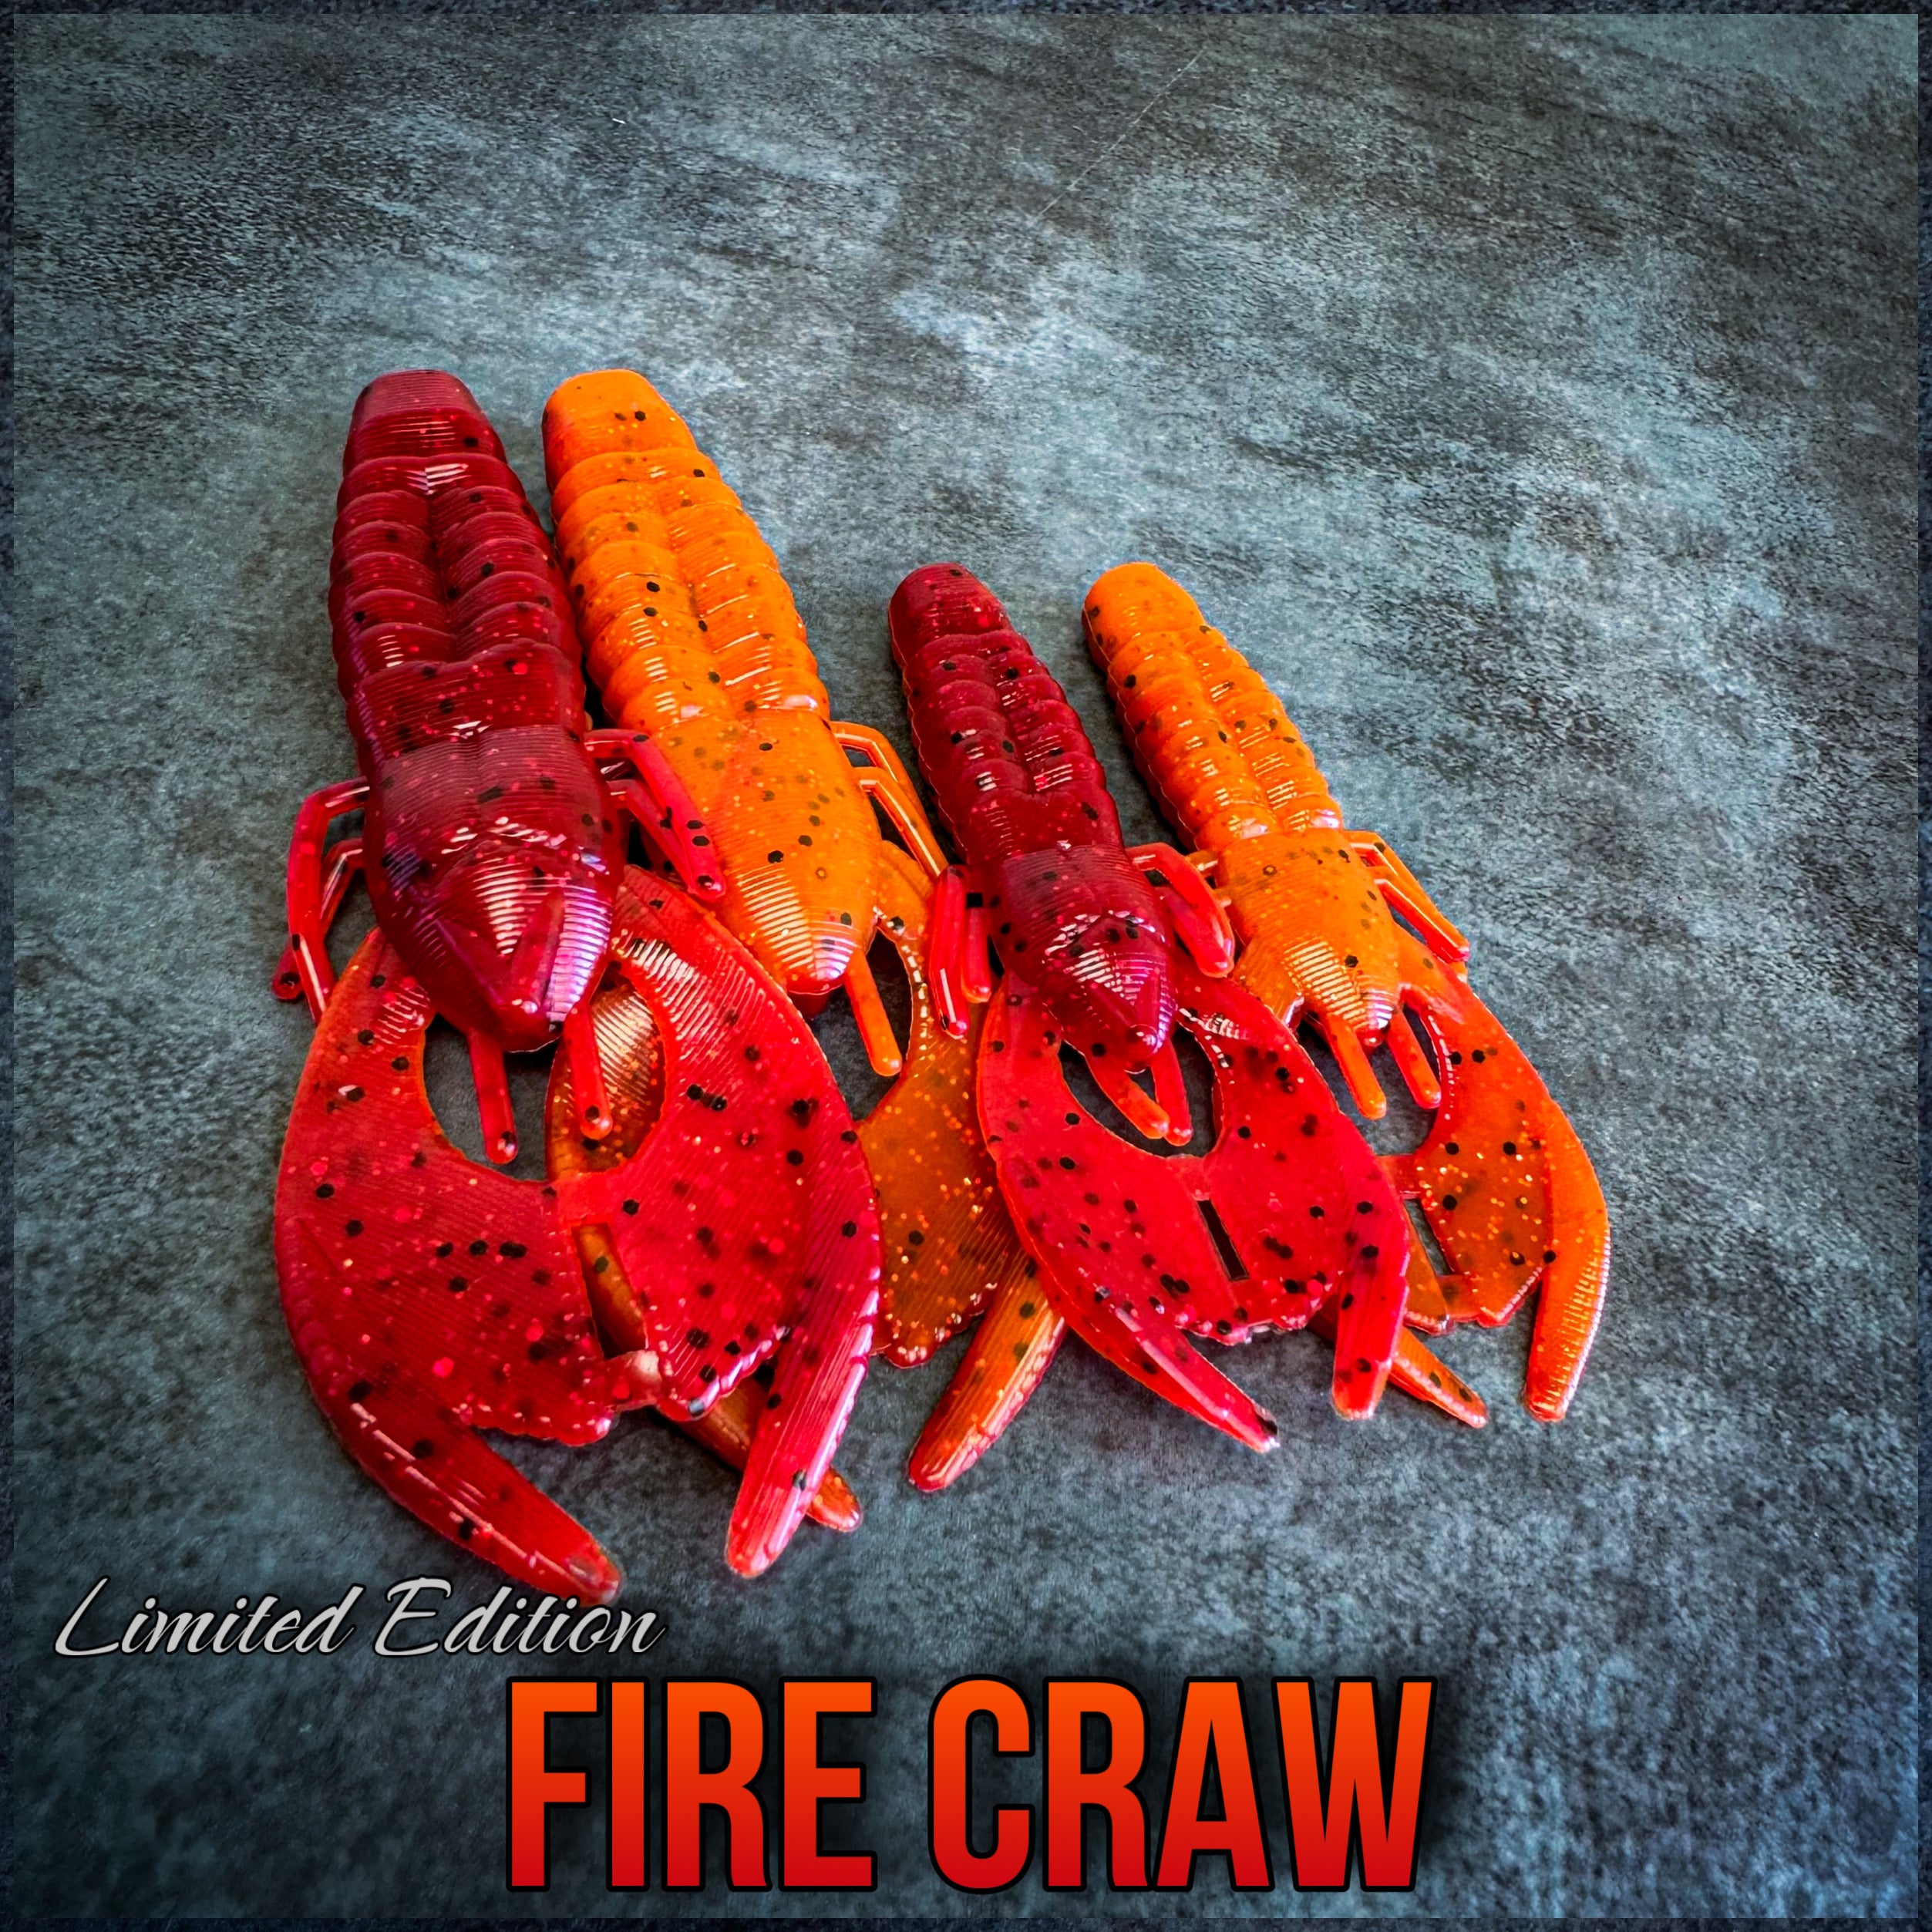 Exclusive Fire Craw - Bugs